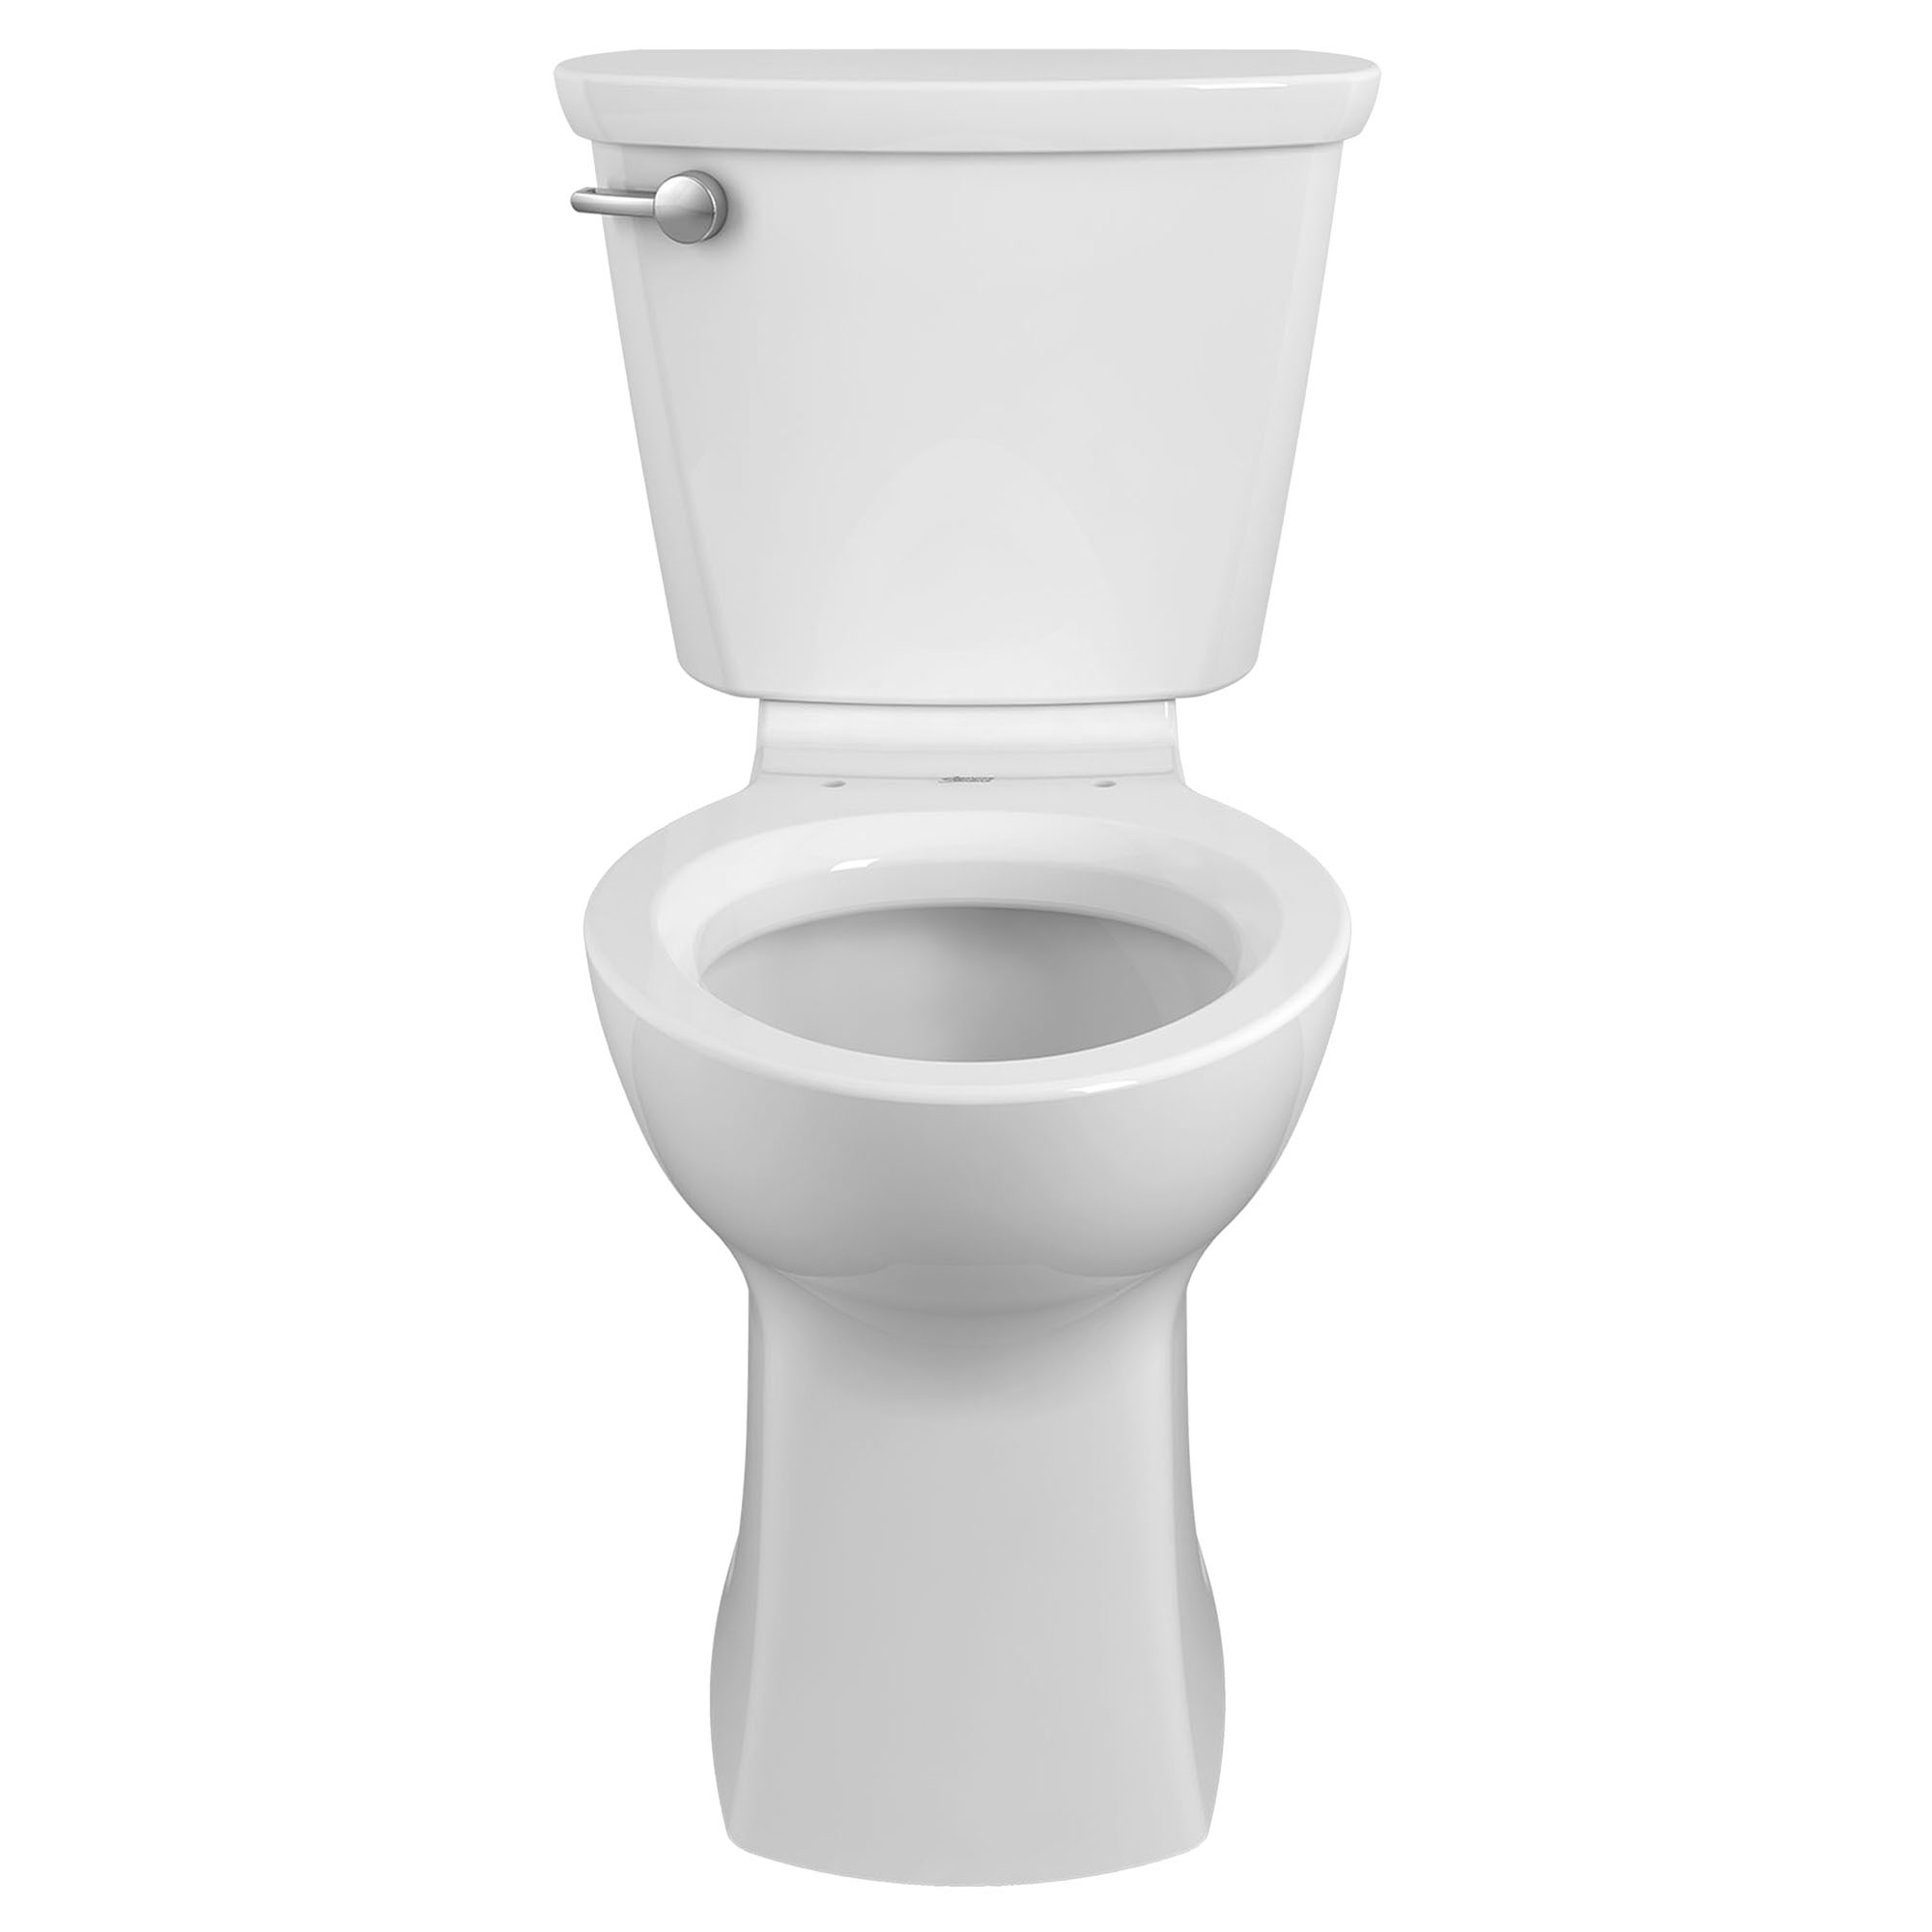 Champion PRO Two-Piece 1.6 gpf/6.0 Lpf Chair Height Elongated Right Hand Trip Lever Toilet less Seat